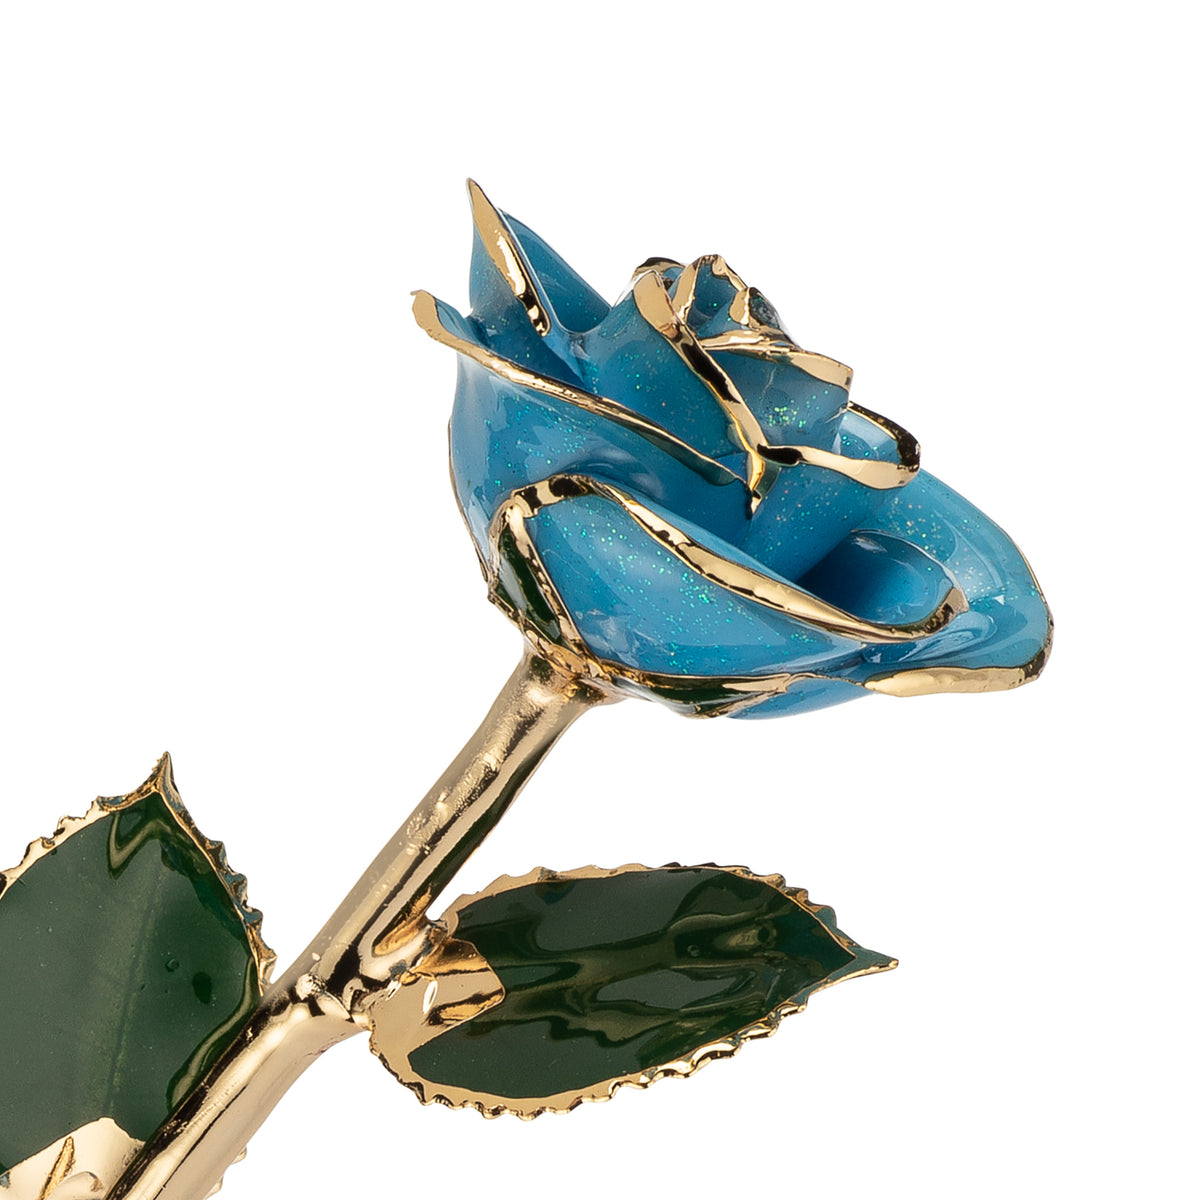 24K Gold Trimmed Forever Rose with Frozen Blue Petals with sparkles suspended in the finish. View of Stem, Leaves, and Rose Petals and Showing Detail of Gold Trim